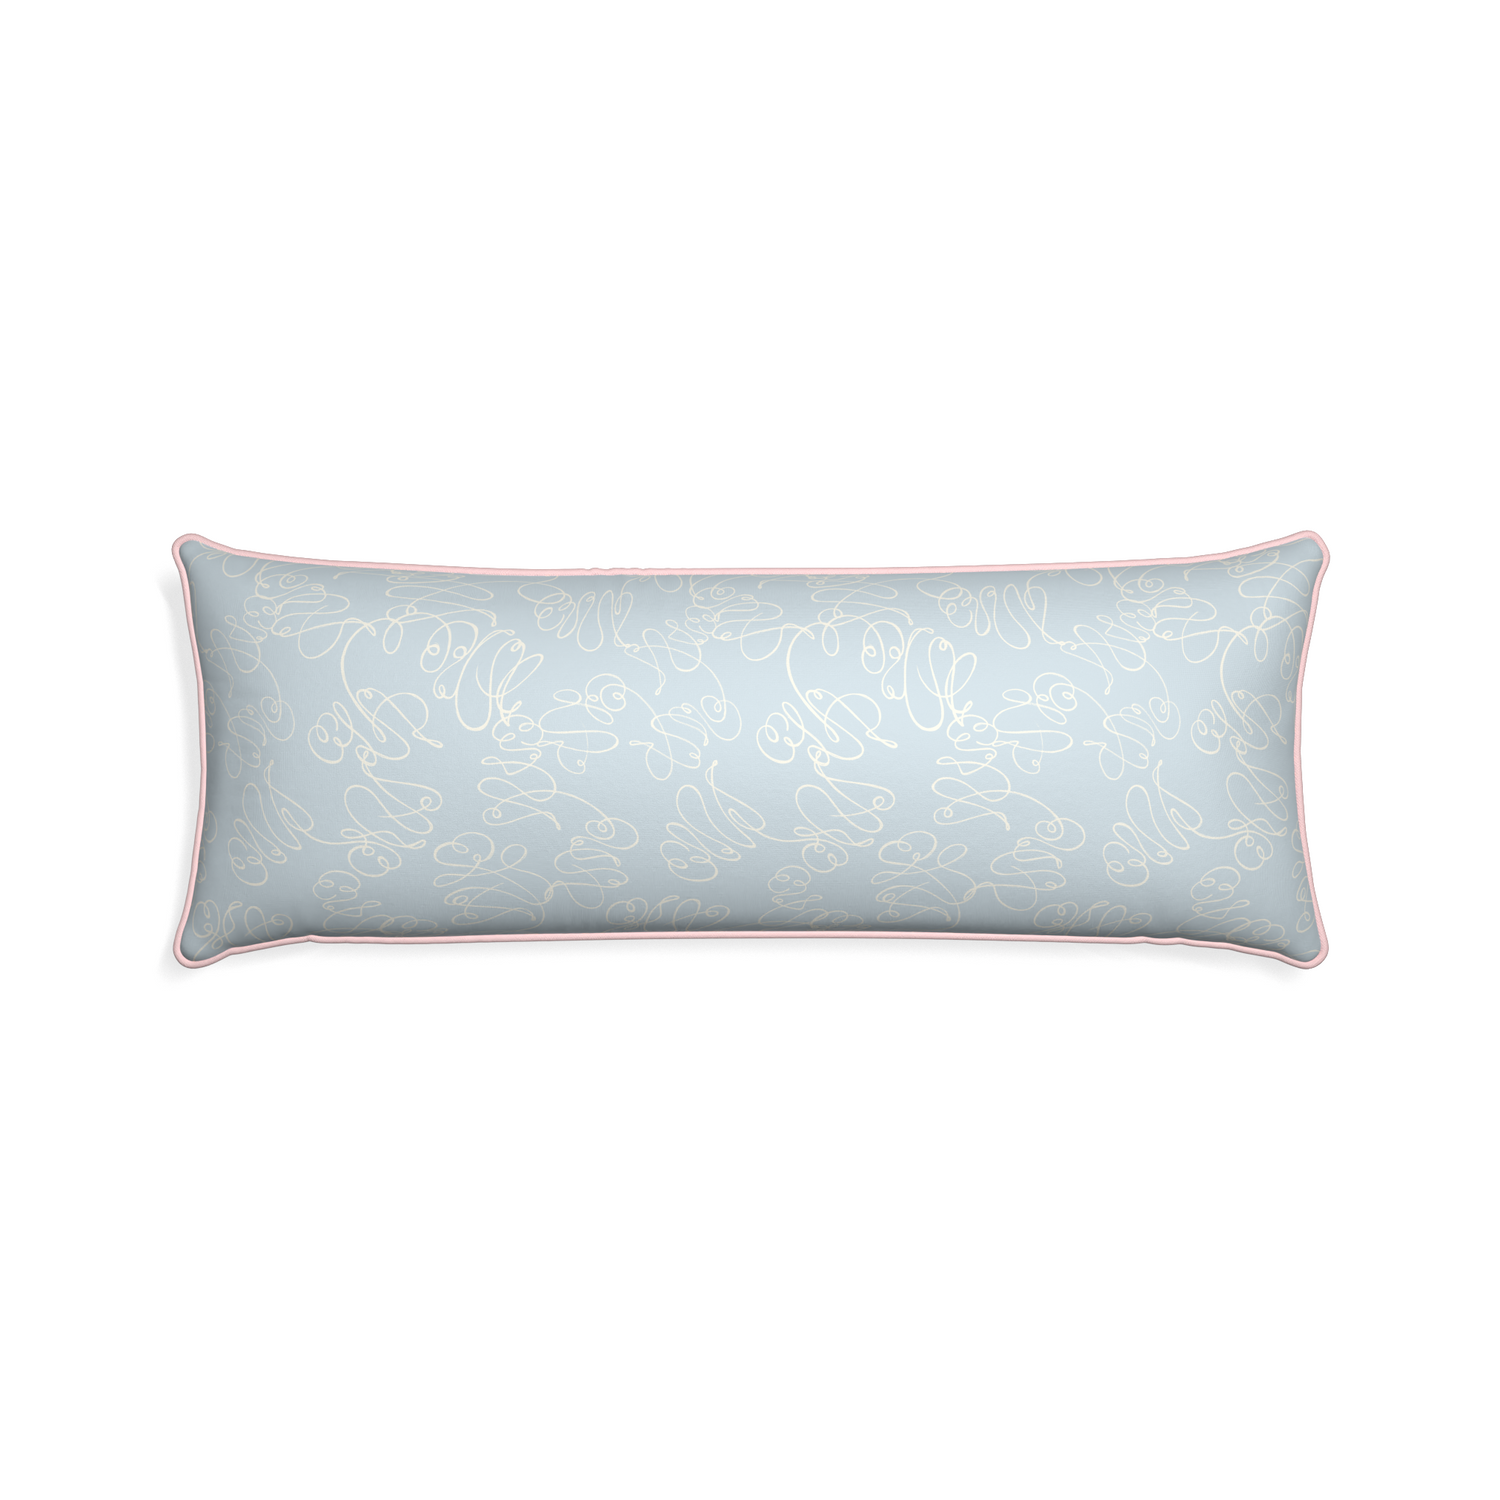 Xl-lumbar mirabella custom pillow with petal piping on white background